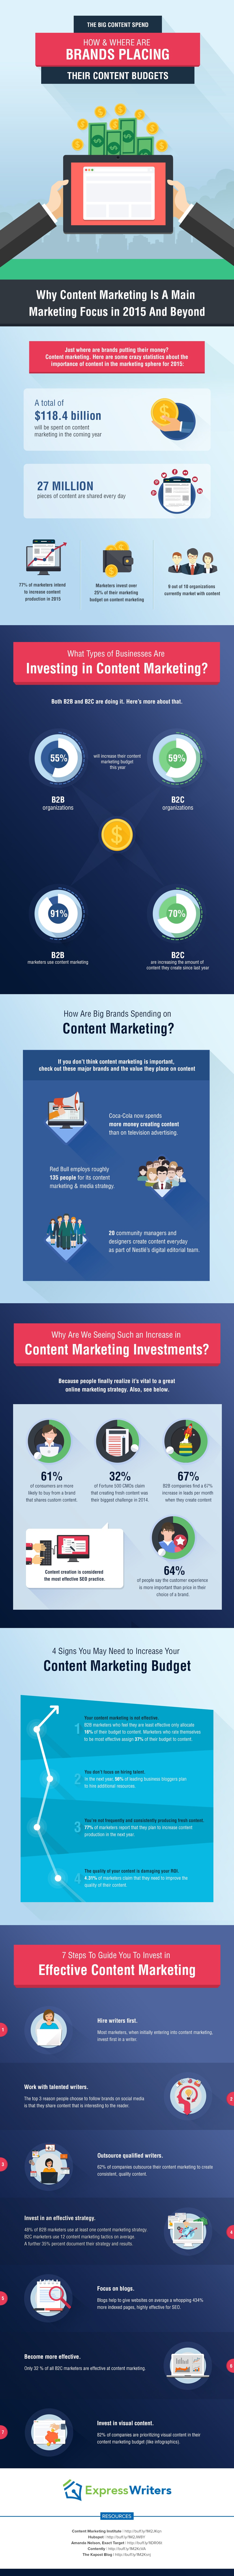 brand-content-budget-infographic